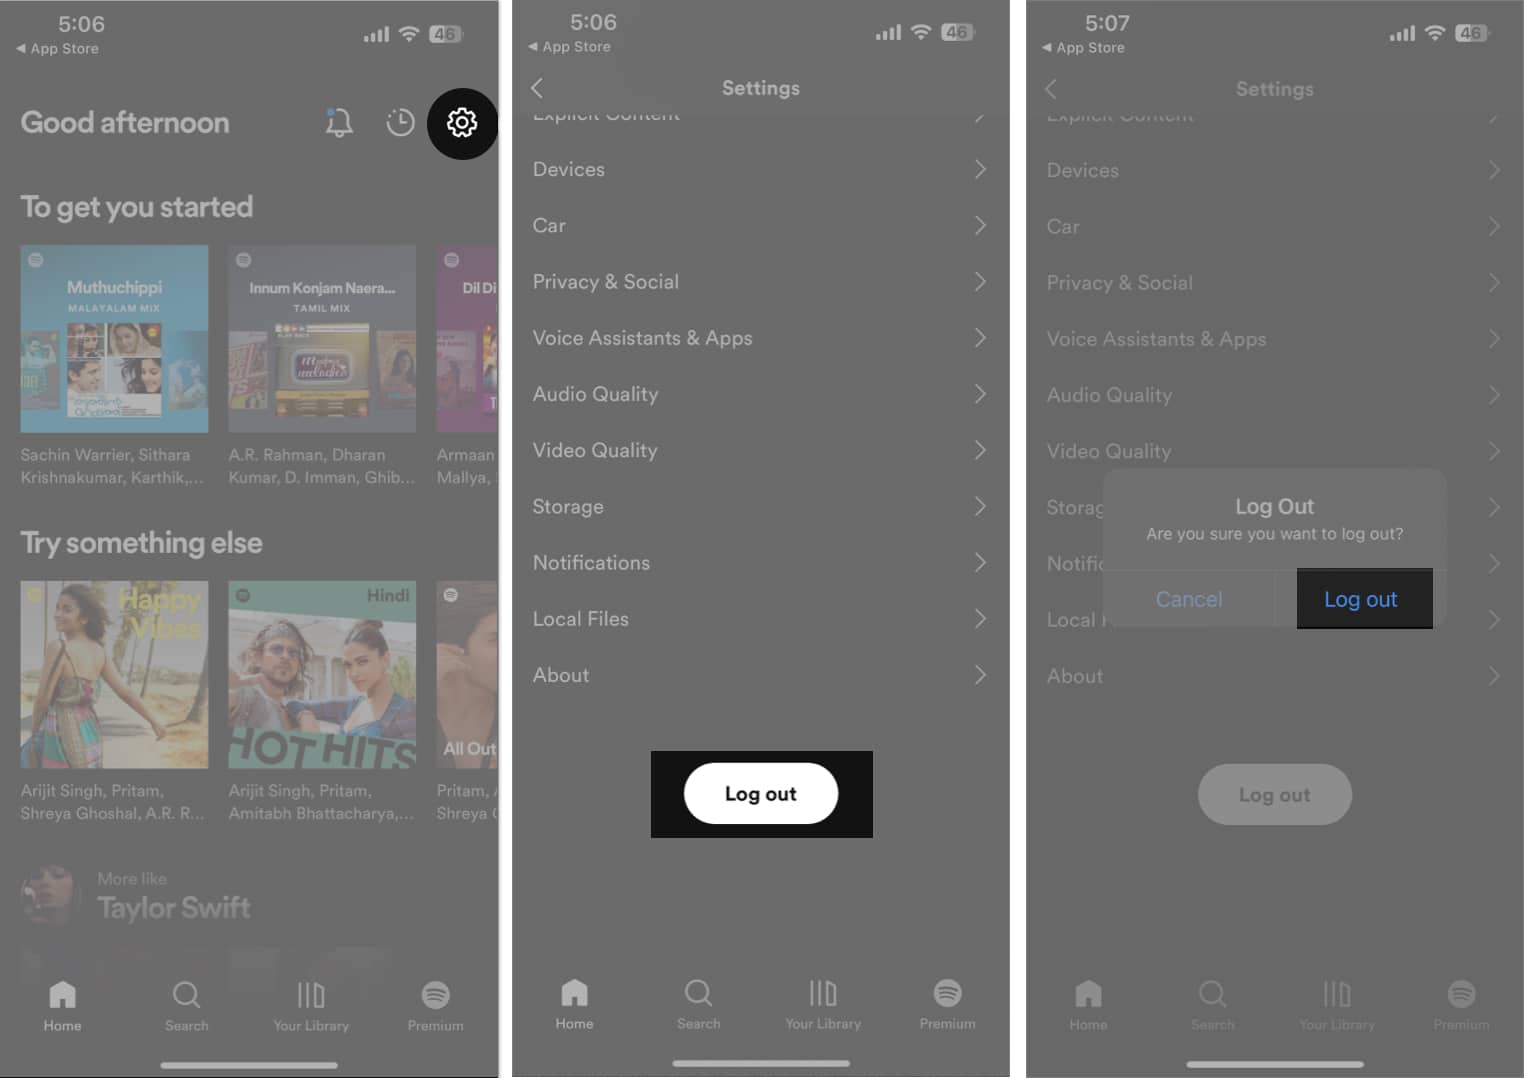 tap gear icon, log out, confirm in Spotify app